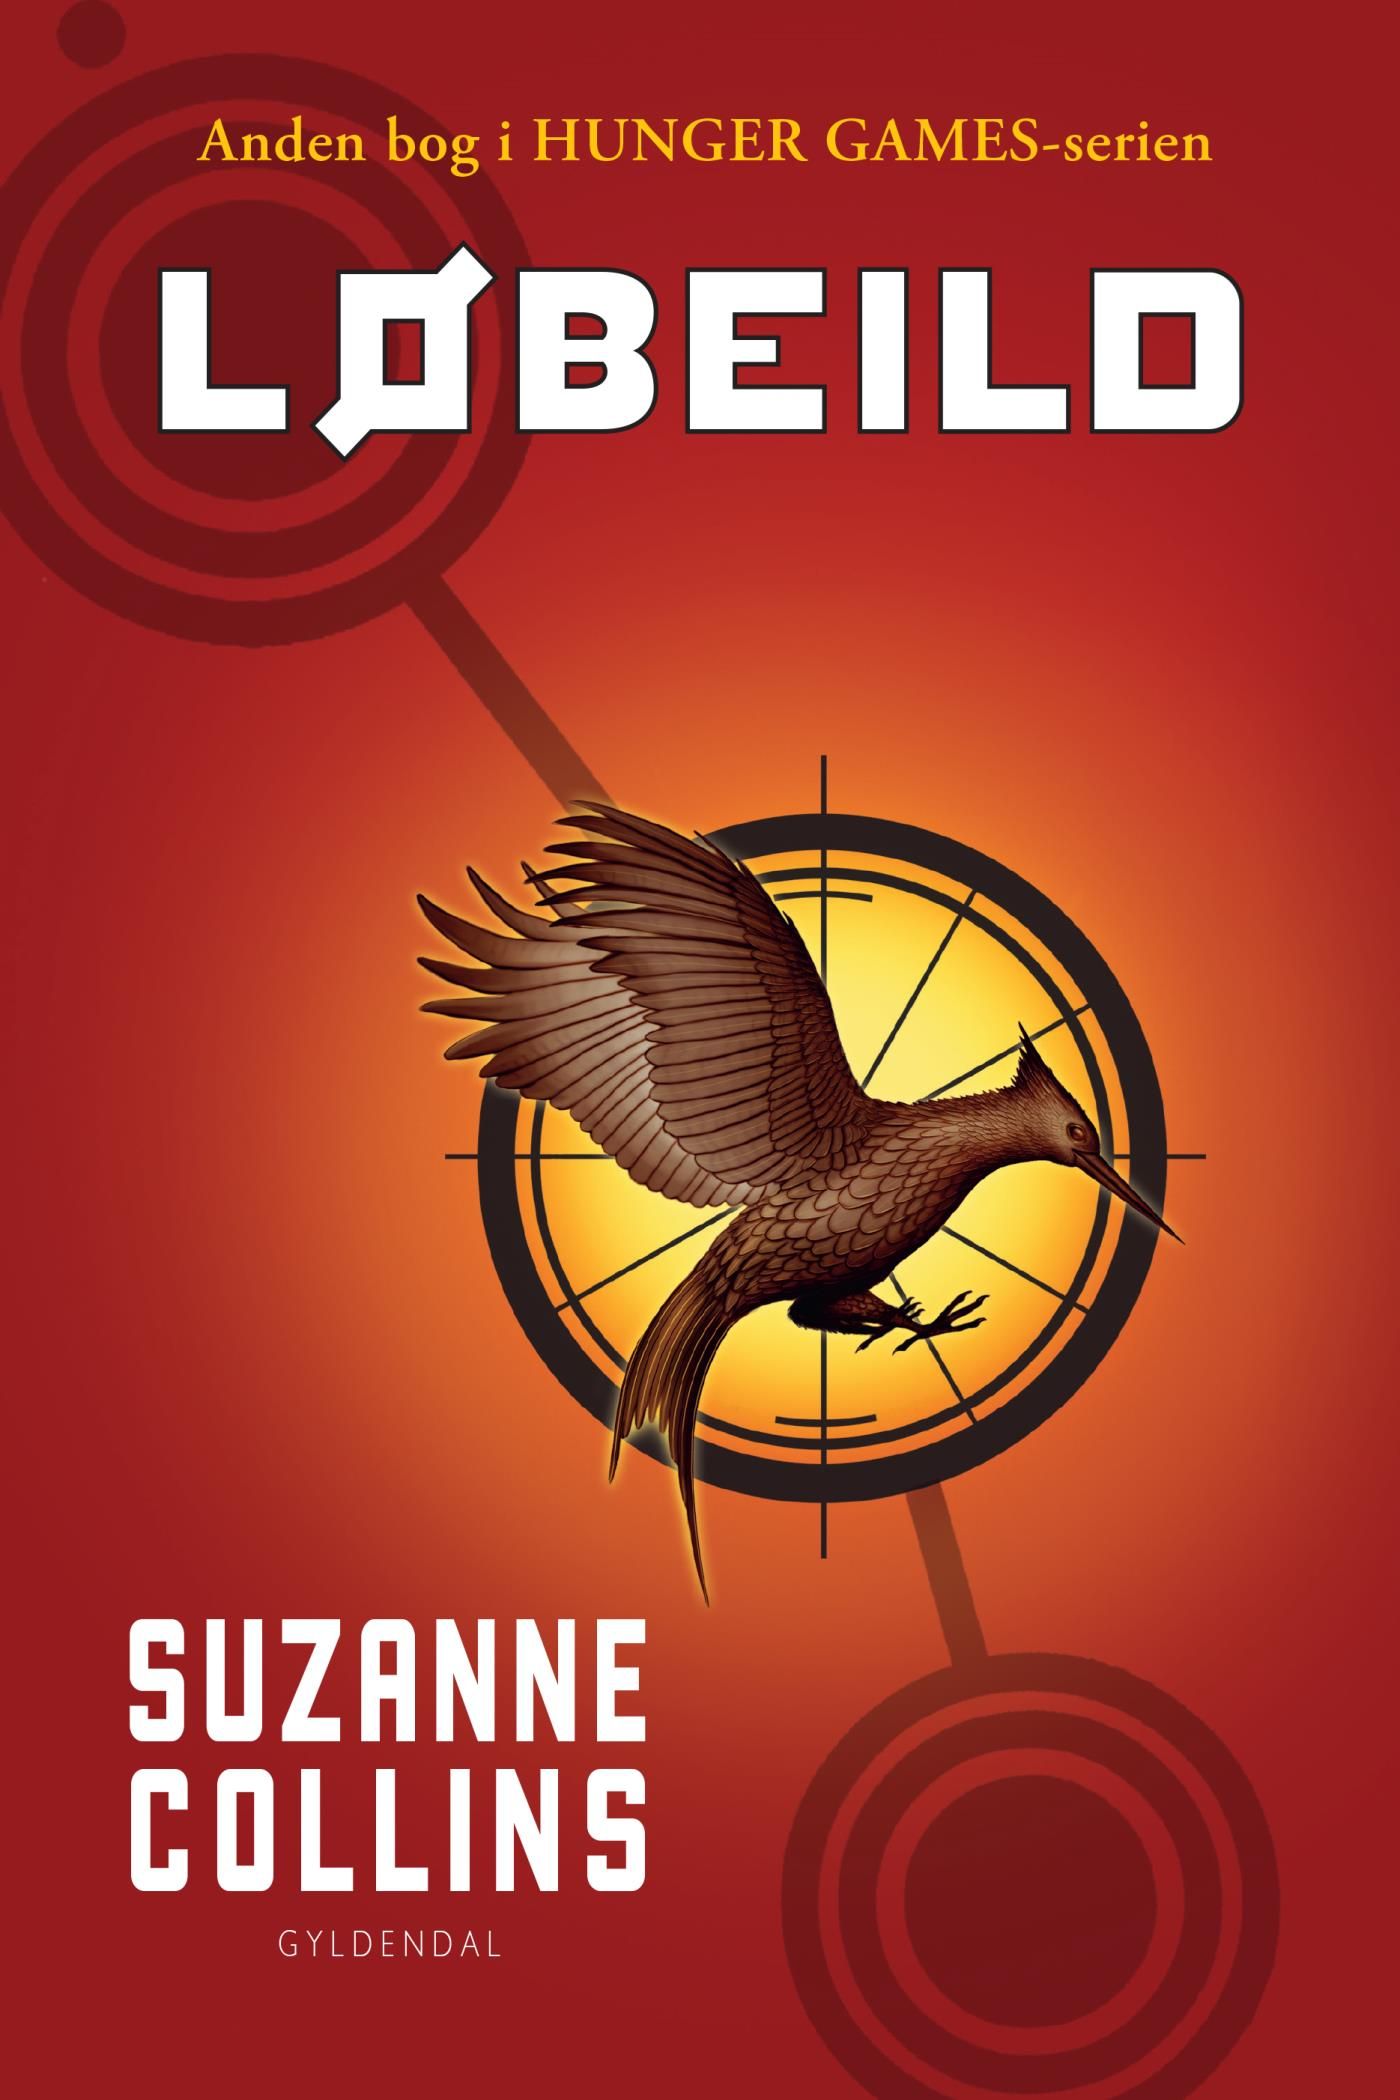 The Hunger Games 2 - Løbeild, eBook by Suzanne Collins